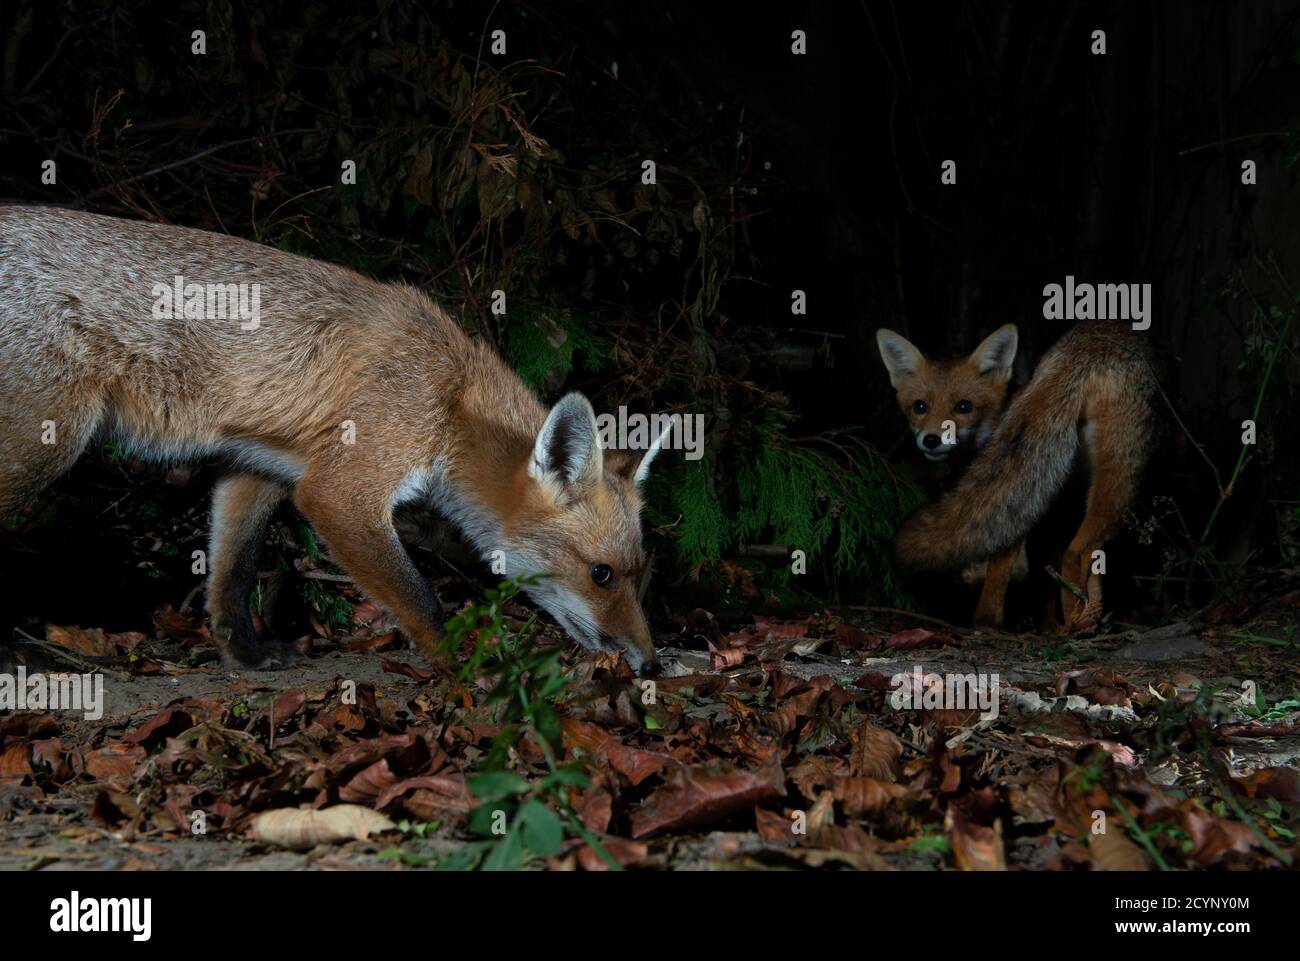 Two foxes at night one is searching the ground and the other has tail curled round looking behind over it's shoulder Stock Photo